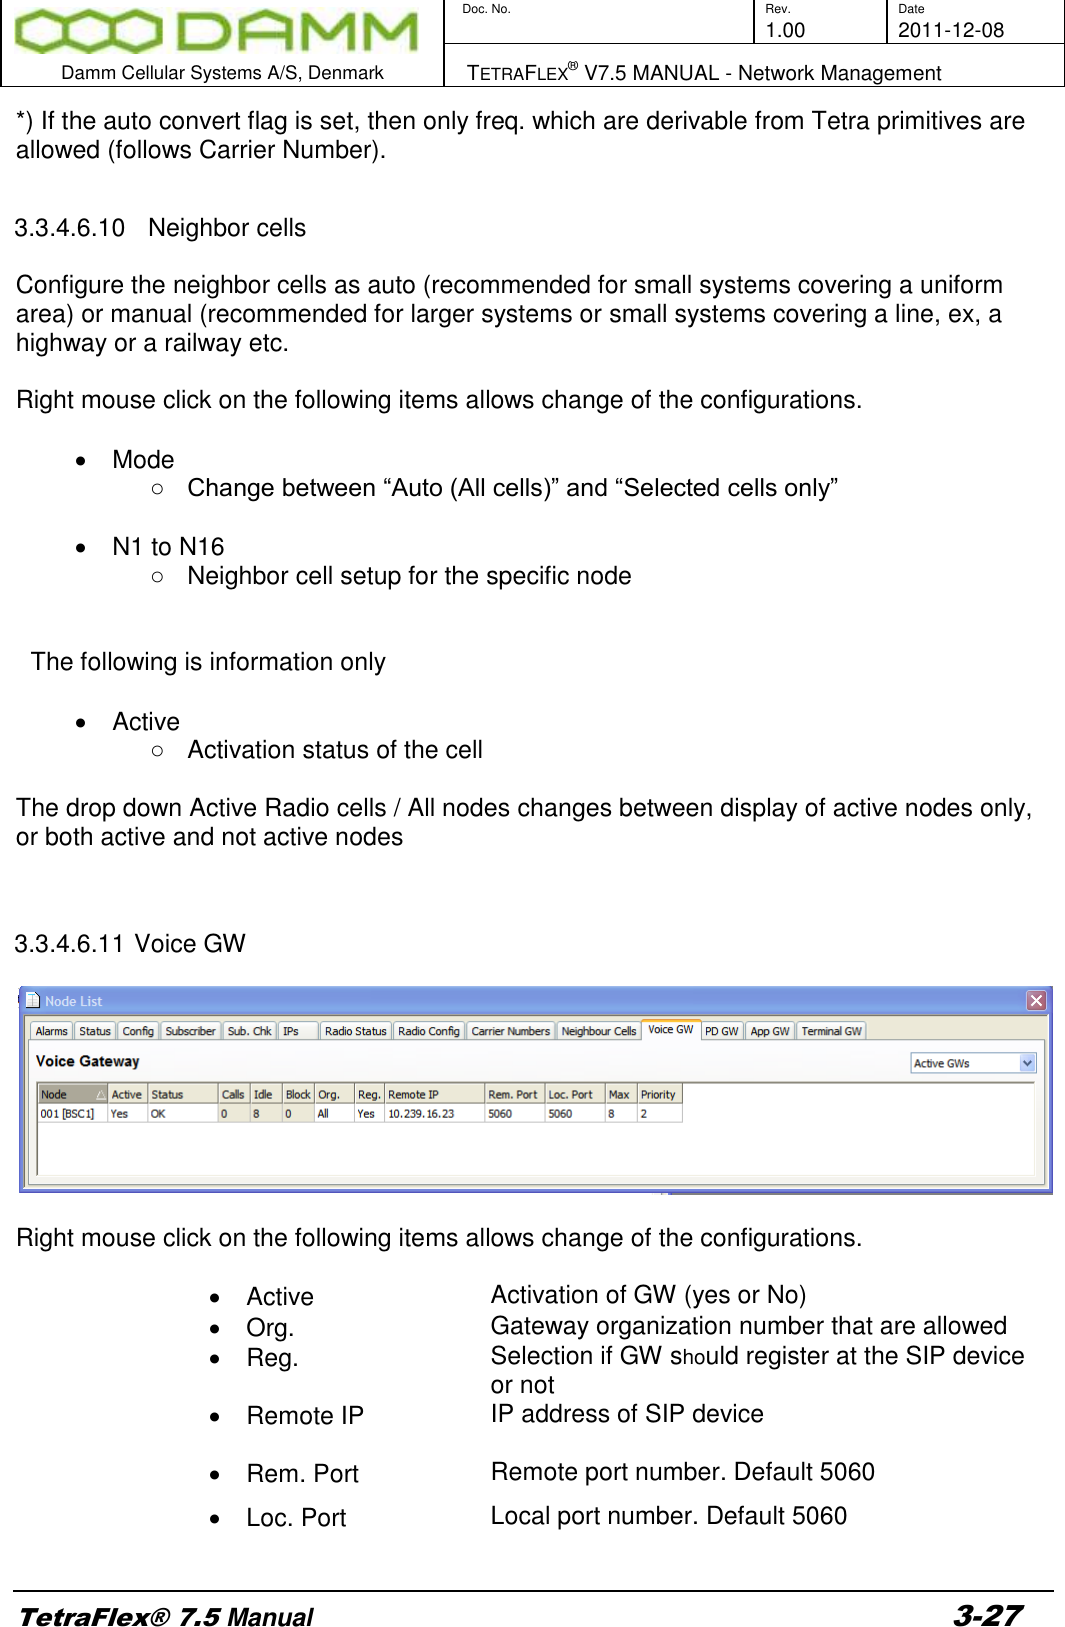        Doc. No. Rev. Date     1.00 2011-12-08  Damm Cellular Systems A/S, Denmark   TETRAFLEX® V7.5 MANUAL - Network Management  TetraFlex® 7.5 Manual 3-27 *) If the auto convert flag is set, then only freq. which are derivable from Tetra primitives are allowed (follows Carrier Number).  3.3.4.6.10   Neighbor cells  Configure the neighbor cells as auto (recommended for small systems covering a uniform area) or manual (recommended for larger systems or small systems covering a line, ex, a highway or a railway etc.   Right mouse click on the following items allows change of the configurations.    Mode ○ Change between “Auto (All cells)” and “Selected cells only”    N1 to N16 ○  Neighbor cell setup for the specific node   The following is information only    Active ○  Activation status of the cell  The drop down Active Radio cells / All nodes changes between display of active nodes only, or both active and not active nodes   3.3.4.6.11 Voice GW    Right mouse click on the following items allows change of the configurations.    Active      Activation of GW (yes or No)   Org.   Gateway organization number that are allowed   Reg.   Selection if GW should register at the SIP device or not   Remote IP  IP address of SIP device   Rem. Port   Remote port number. Default 5060     Loc. Port   Local port number. Default 5060   